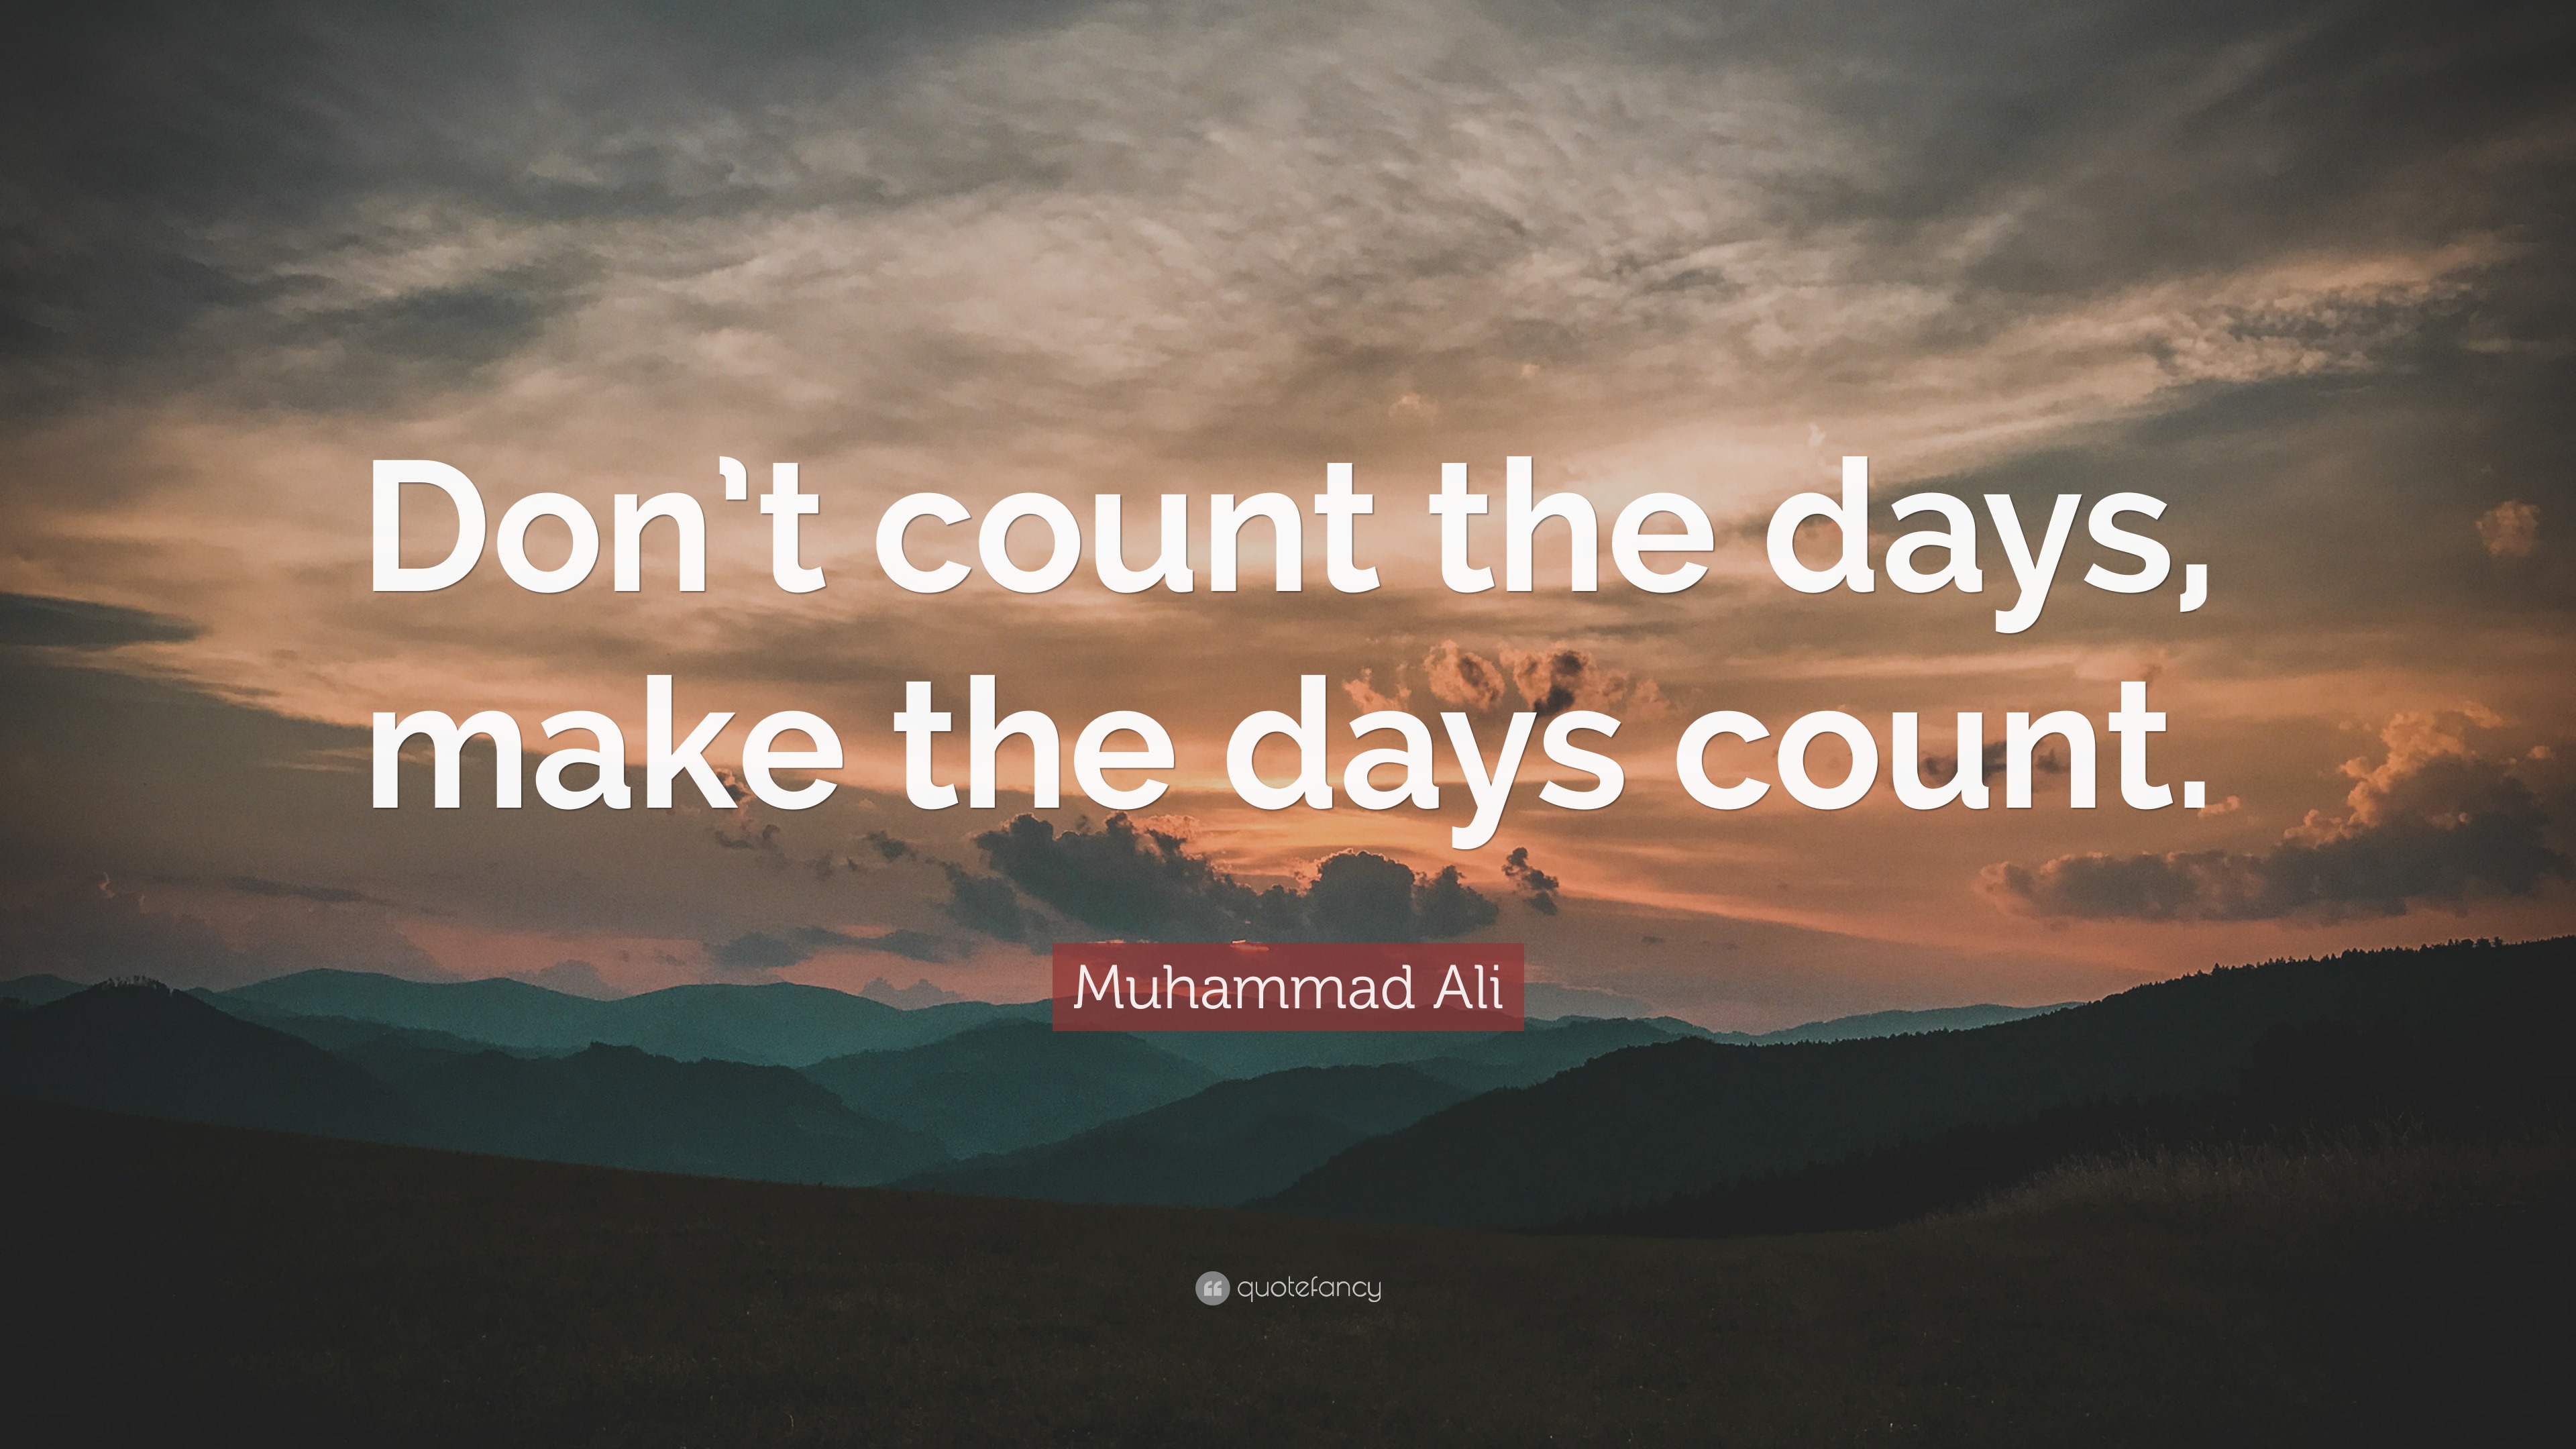 Muhammad Ali Quote: “Don’t count the days, make the days count.” (40